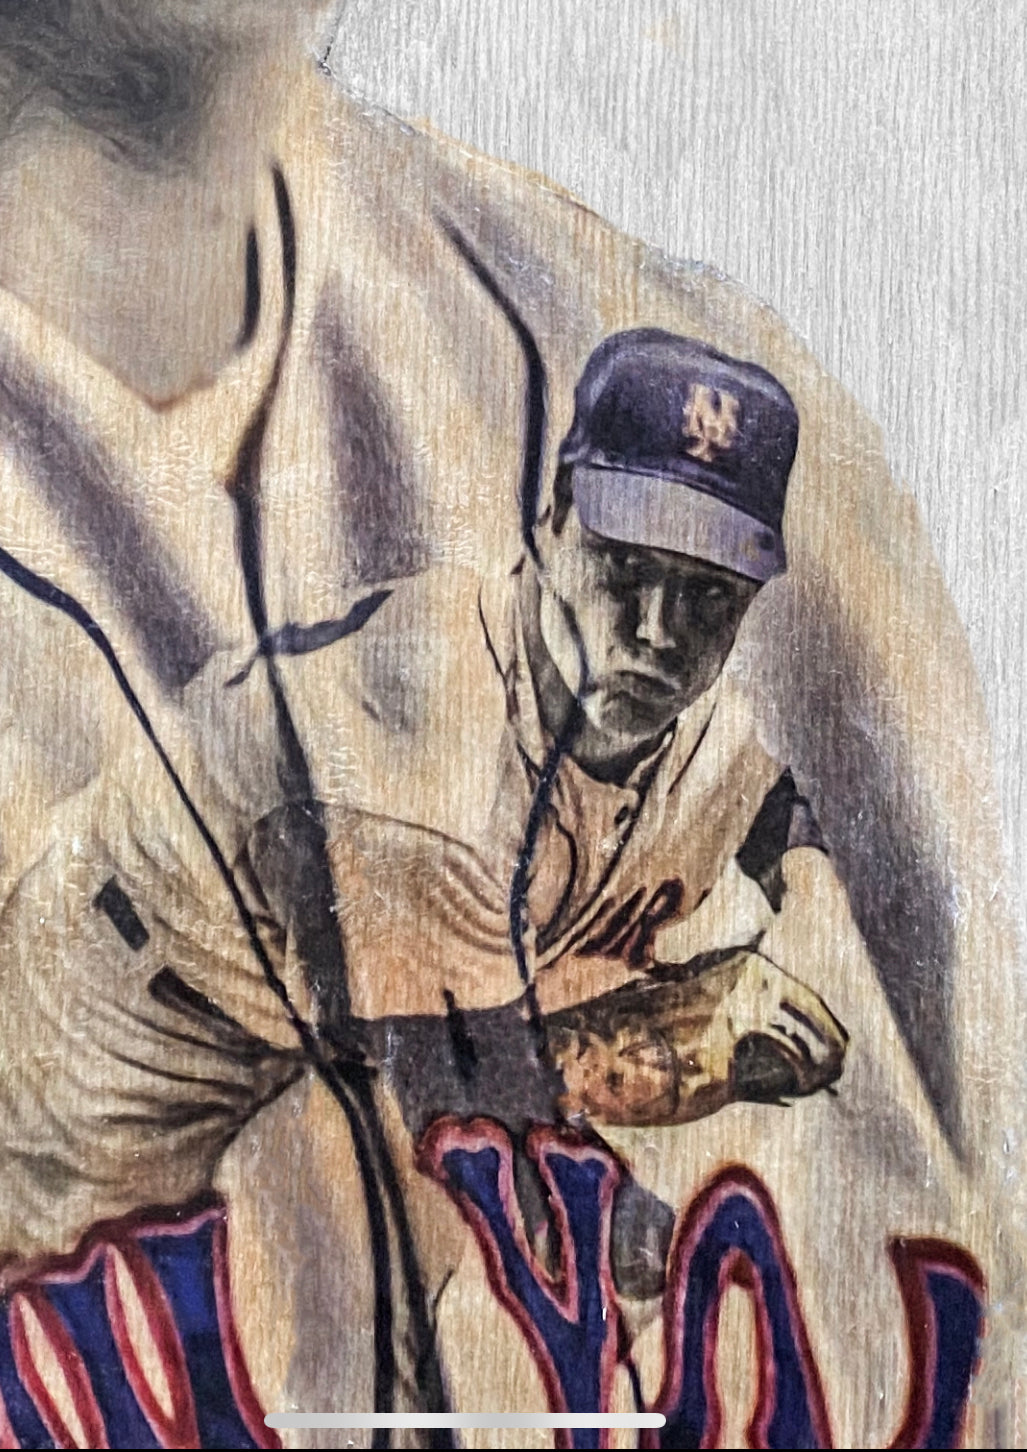 "The Franchise" (Tom Seaver) New York Mets - Officially Licensed MLB Cooperstown Collection Print - Limited Release